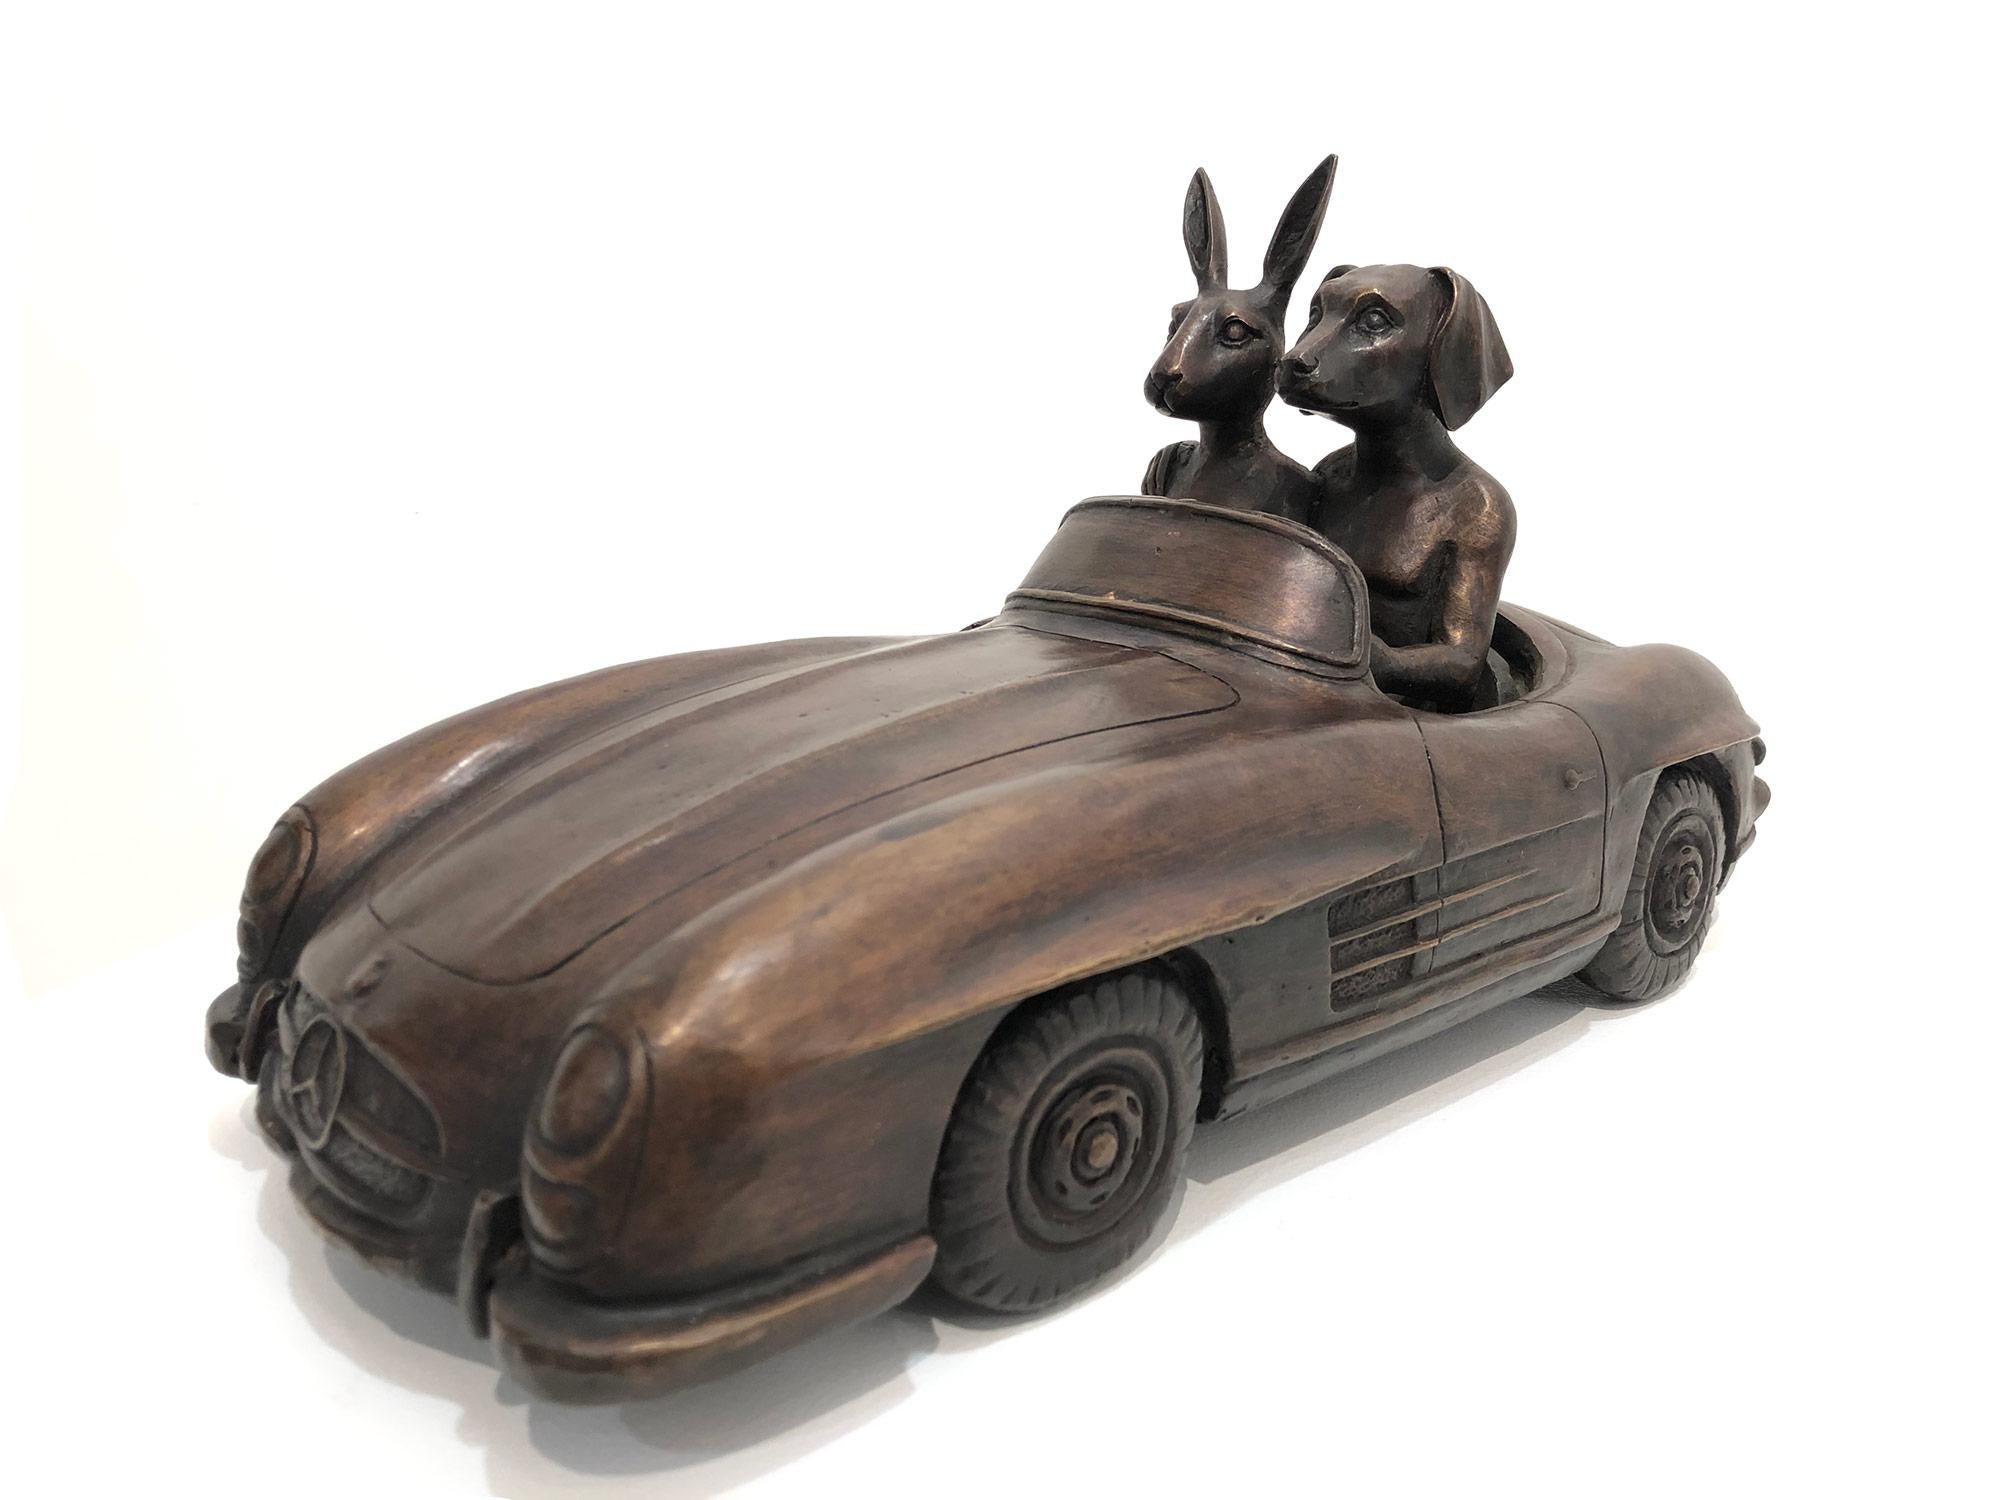 Gillie and Marc Schattner Figurative Sculpture - A Merc is a Rabbit and Dogs' Best Friend